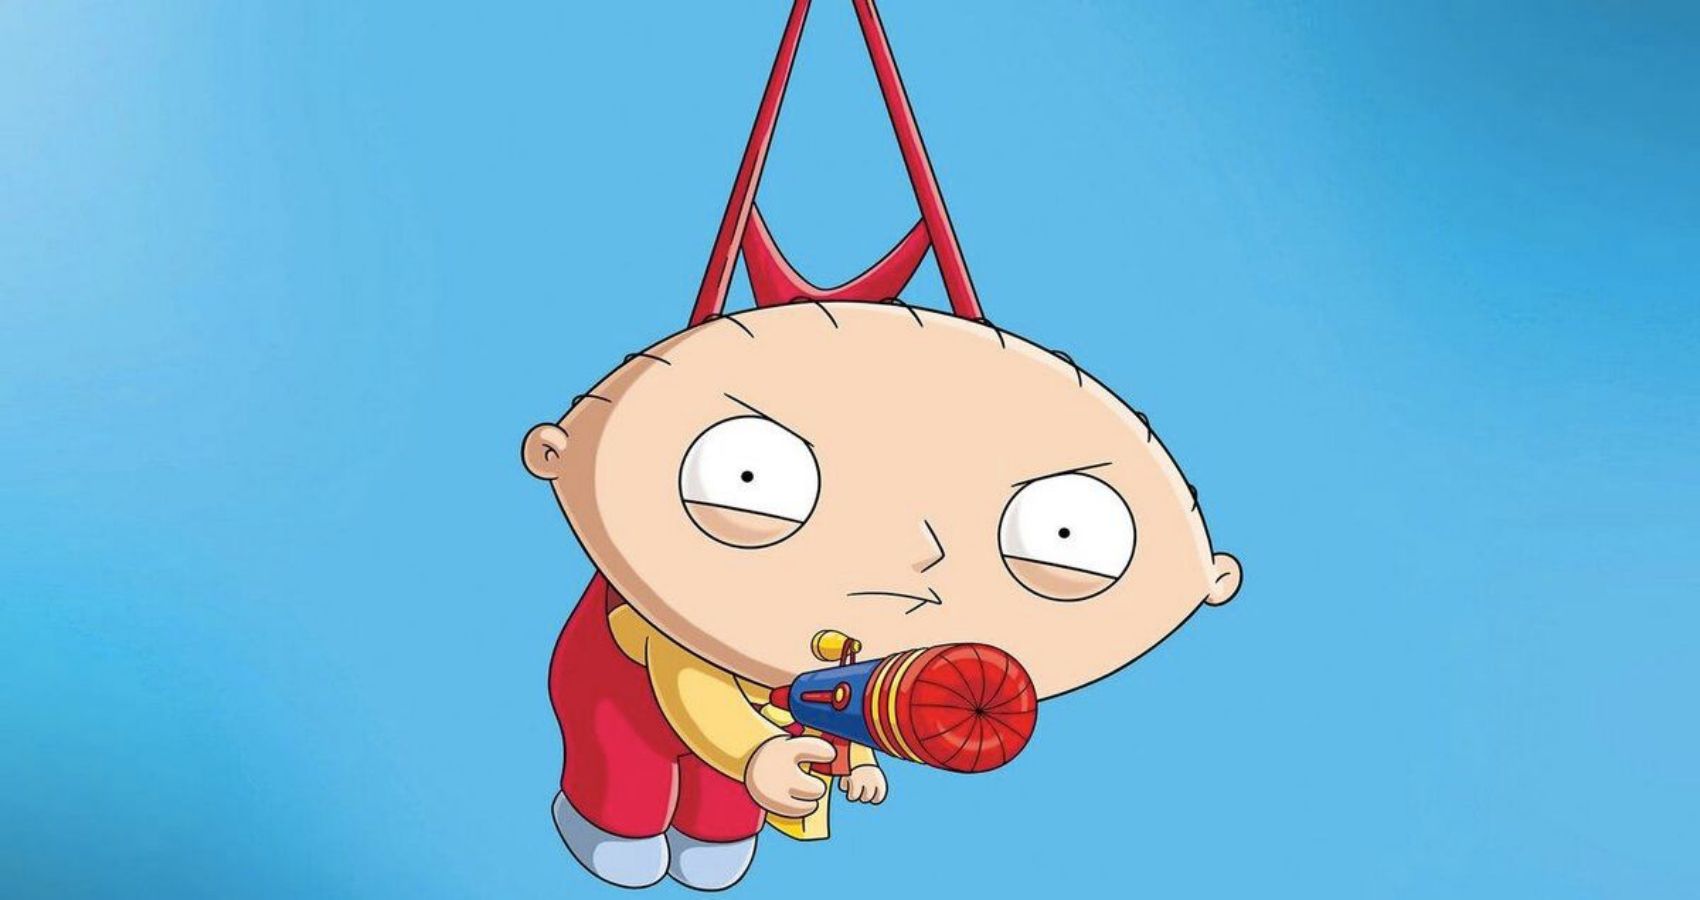 Stewie hangs from something and points a gun